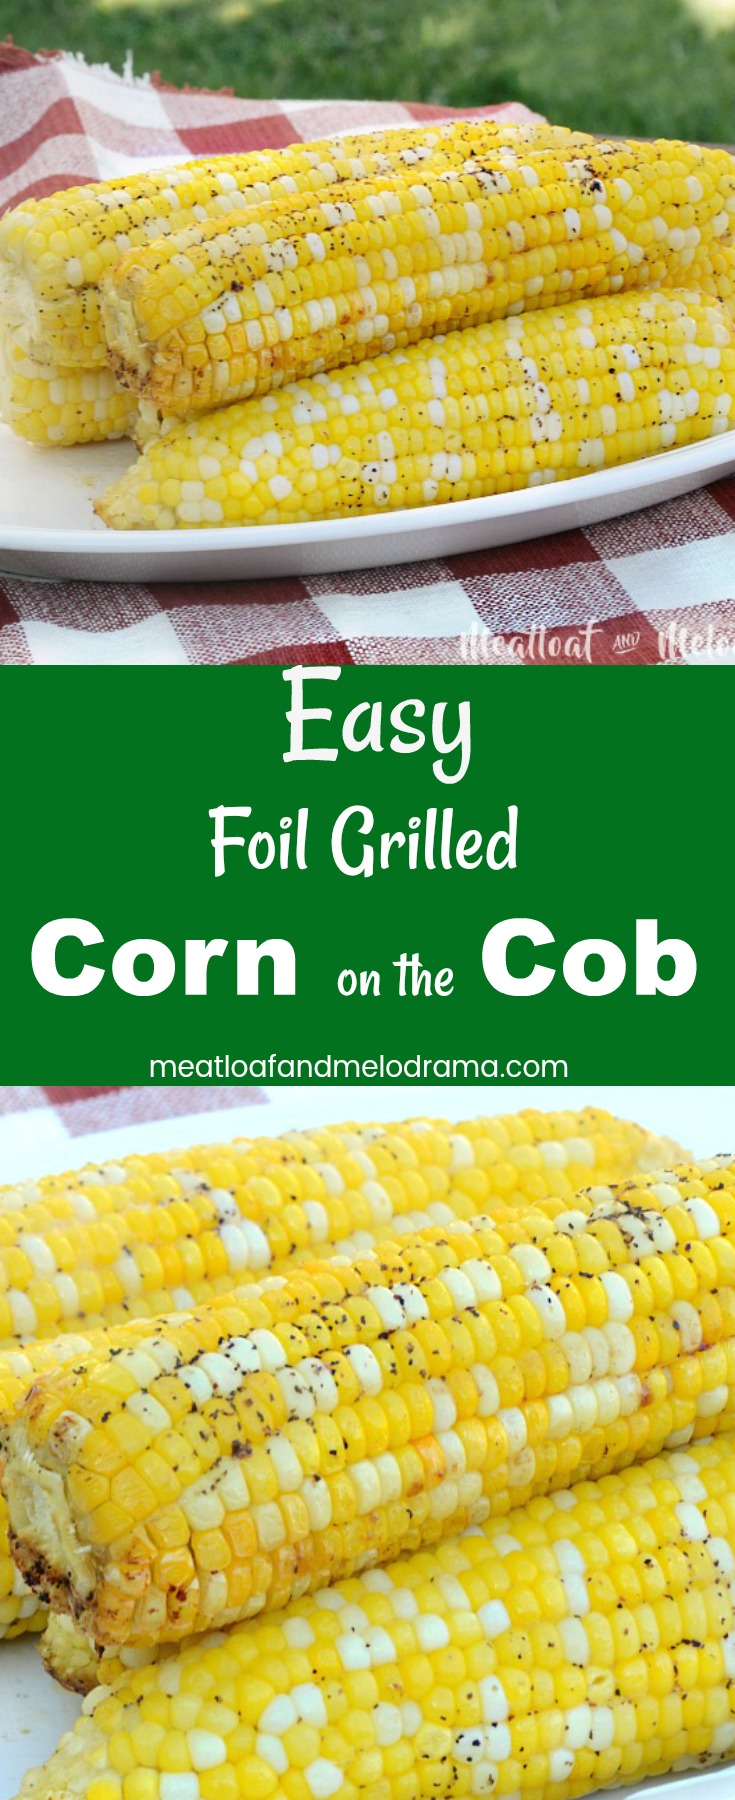 Easy Foil Grill Corn on the Cob - Quick and easy cob roast corn recipe. Corn is fried with garlic butter, salt and pepper, then grilled until fragrant. Make a great summer side dish that takes just 15 minutes to make and requires almost no cleanup!